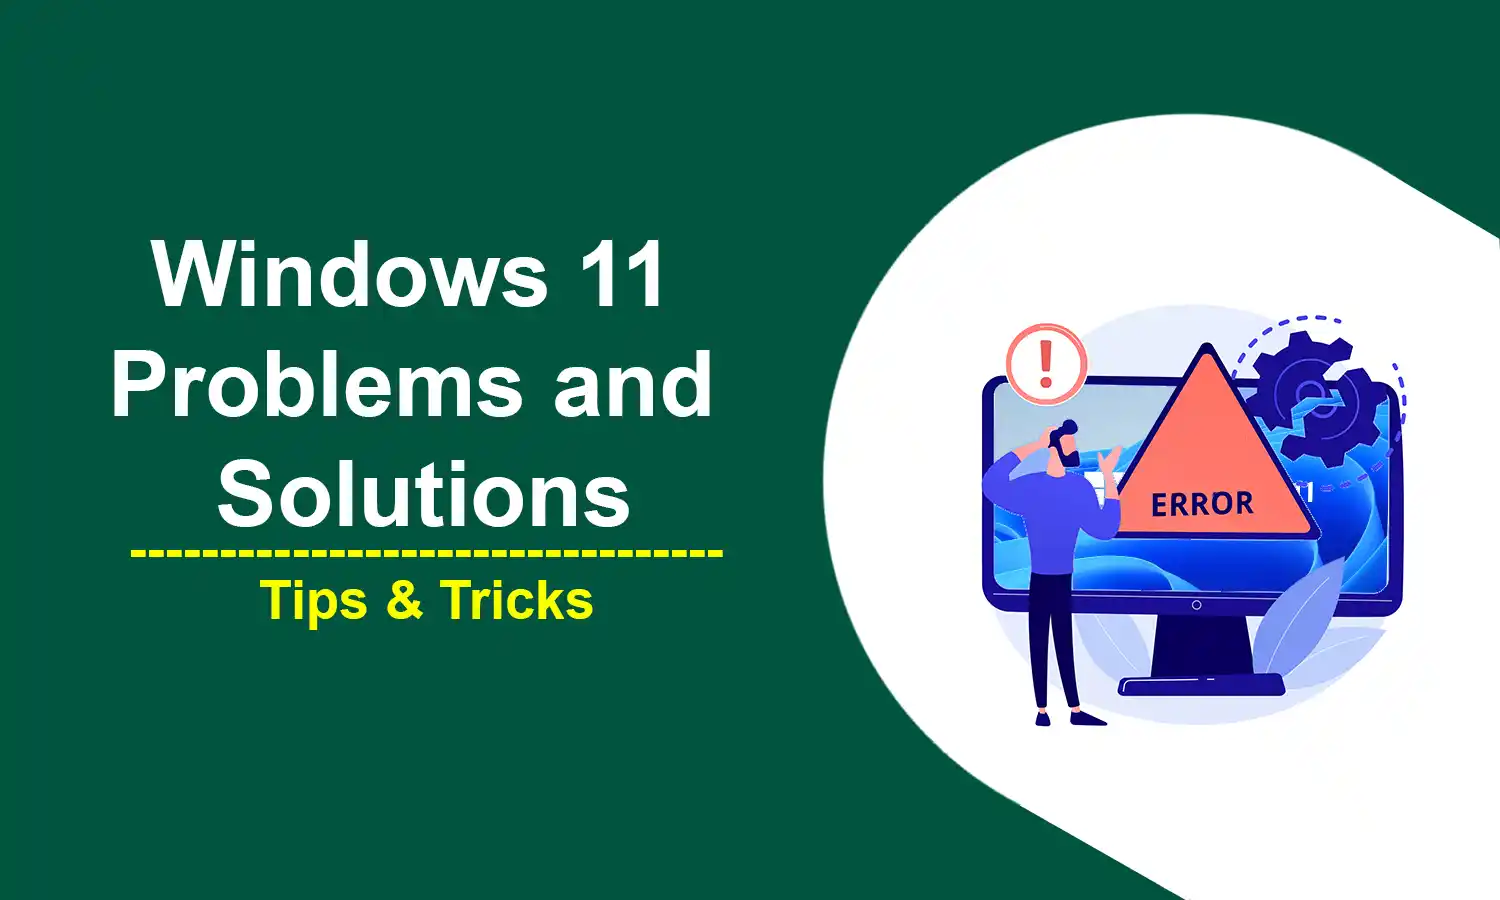 Windows 11 Problems and Solutions Comprehensive Guide